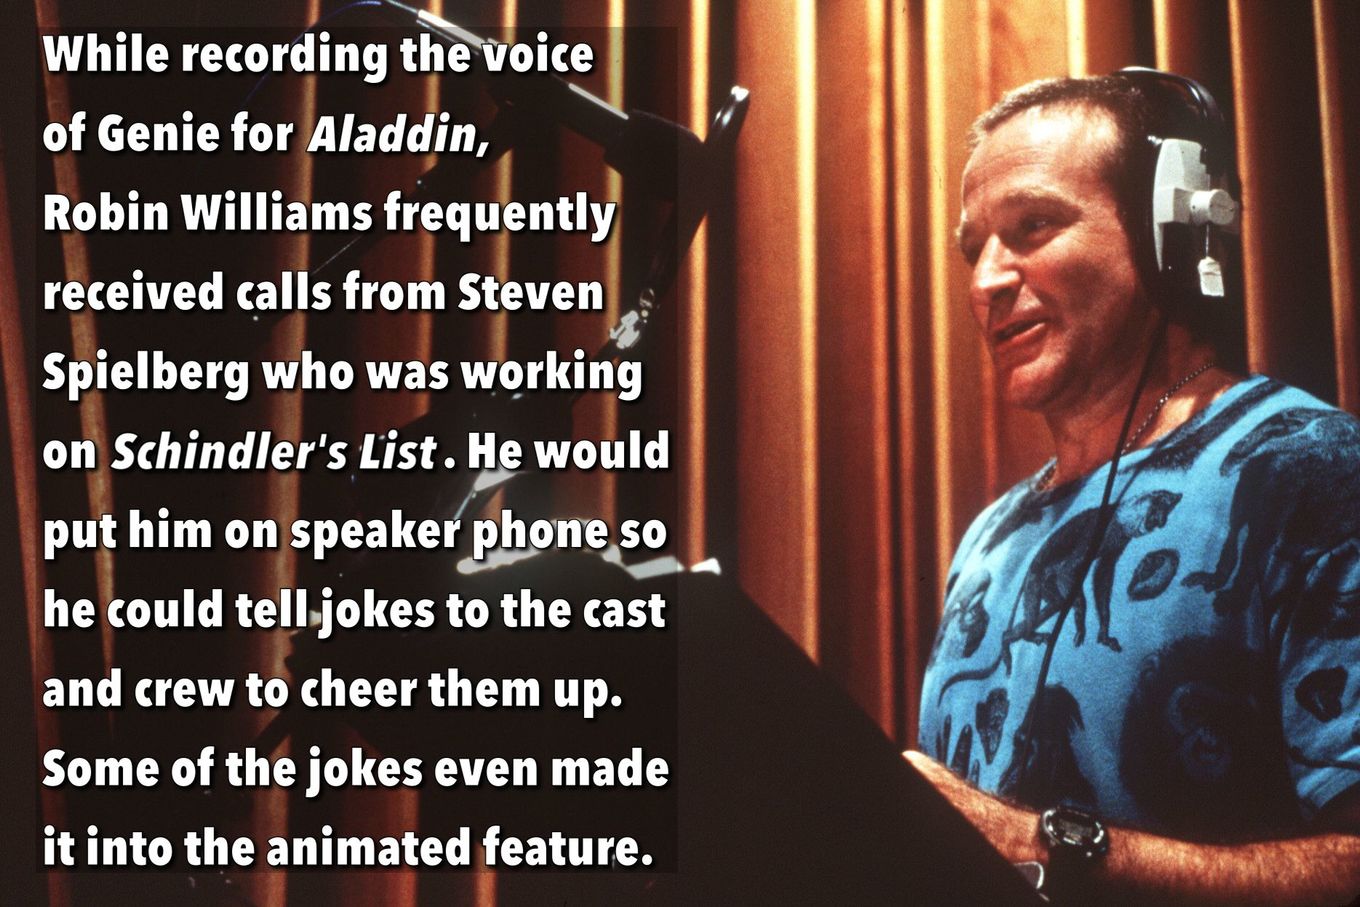 robin williams aladdin - While recording the voice of Genie for Aladdin, Robin Williams frequently received calls from Steven Spielberg who was working on Schindler's List. He would put him on speaker phone so he could tell.jokes to the cast and crew to c